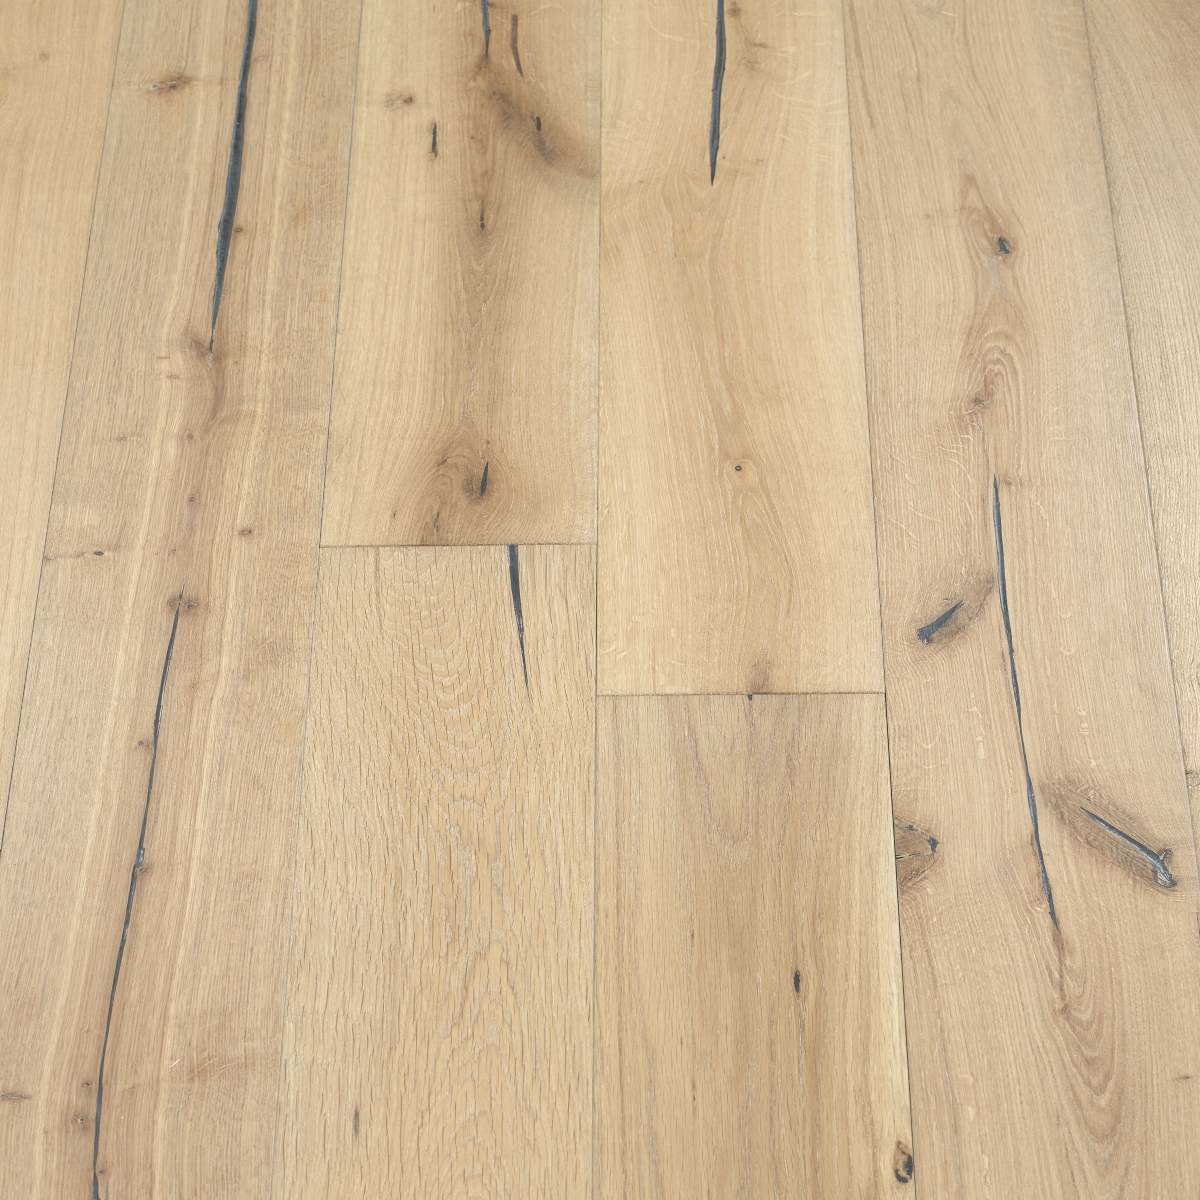 Distressed Pebble Woodflooring - image showcasing distressed pebble-colored wood flooring with a neutral and calming palette, creating a versatile and timeless look.